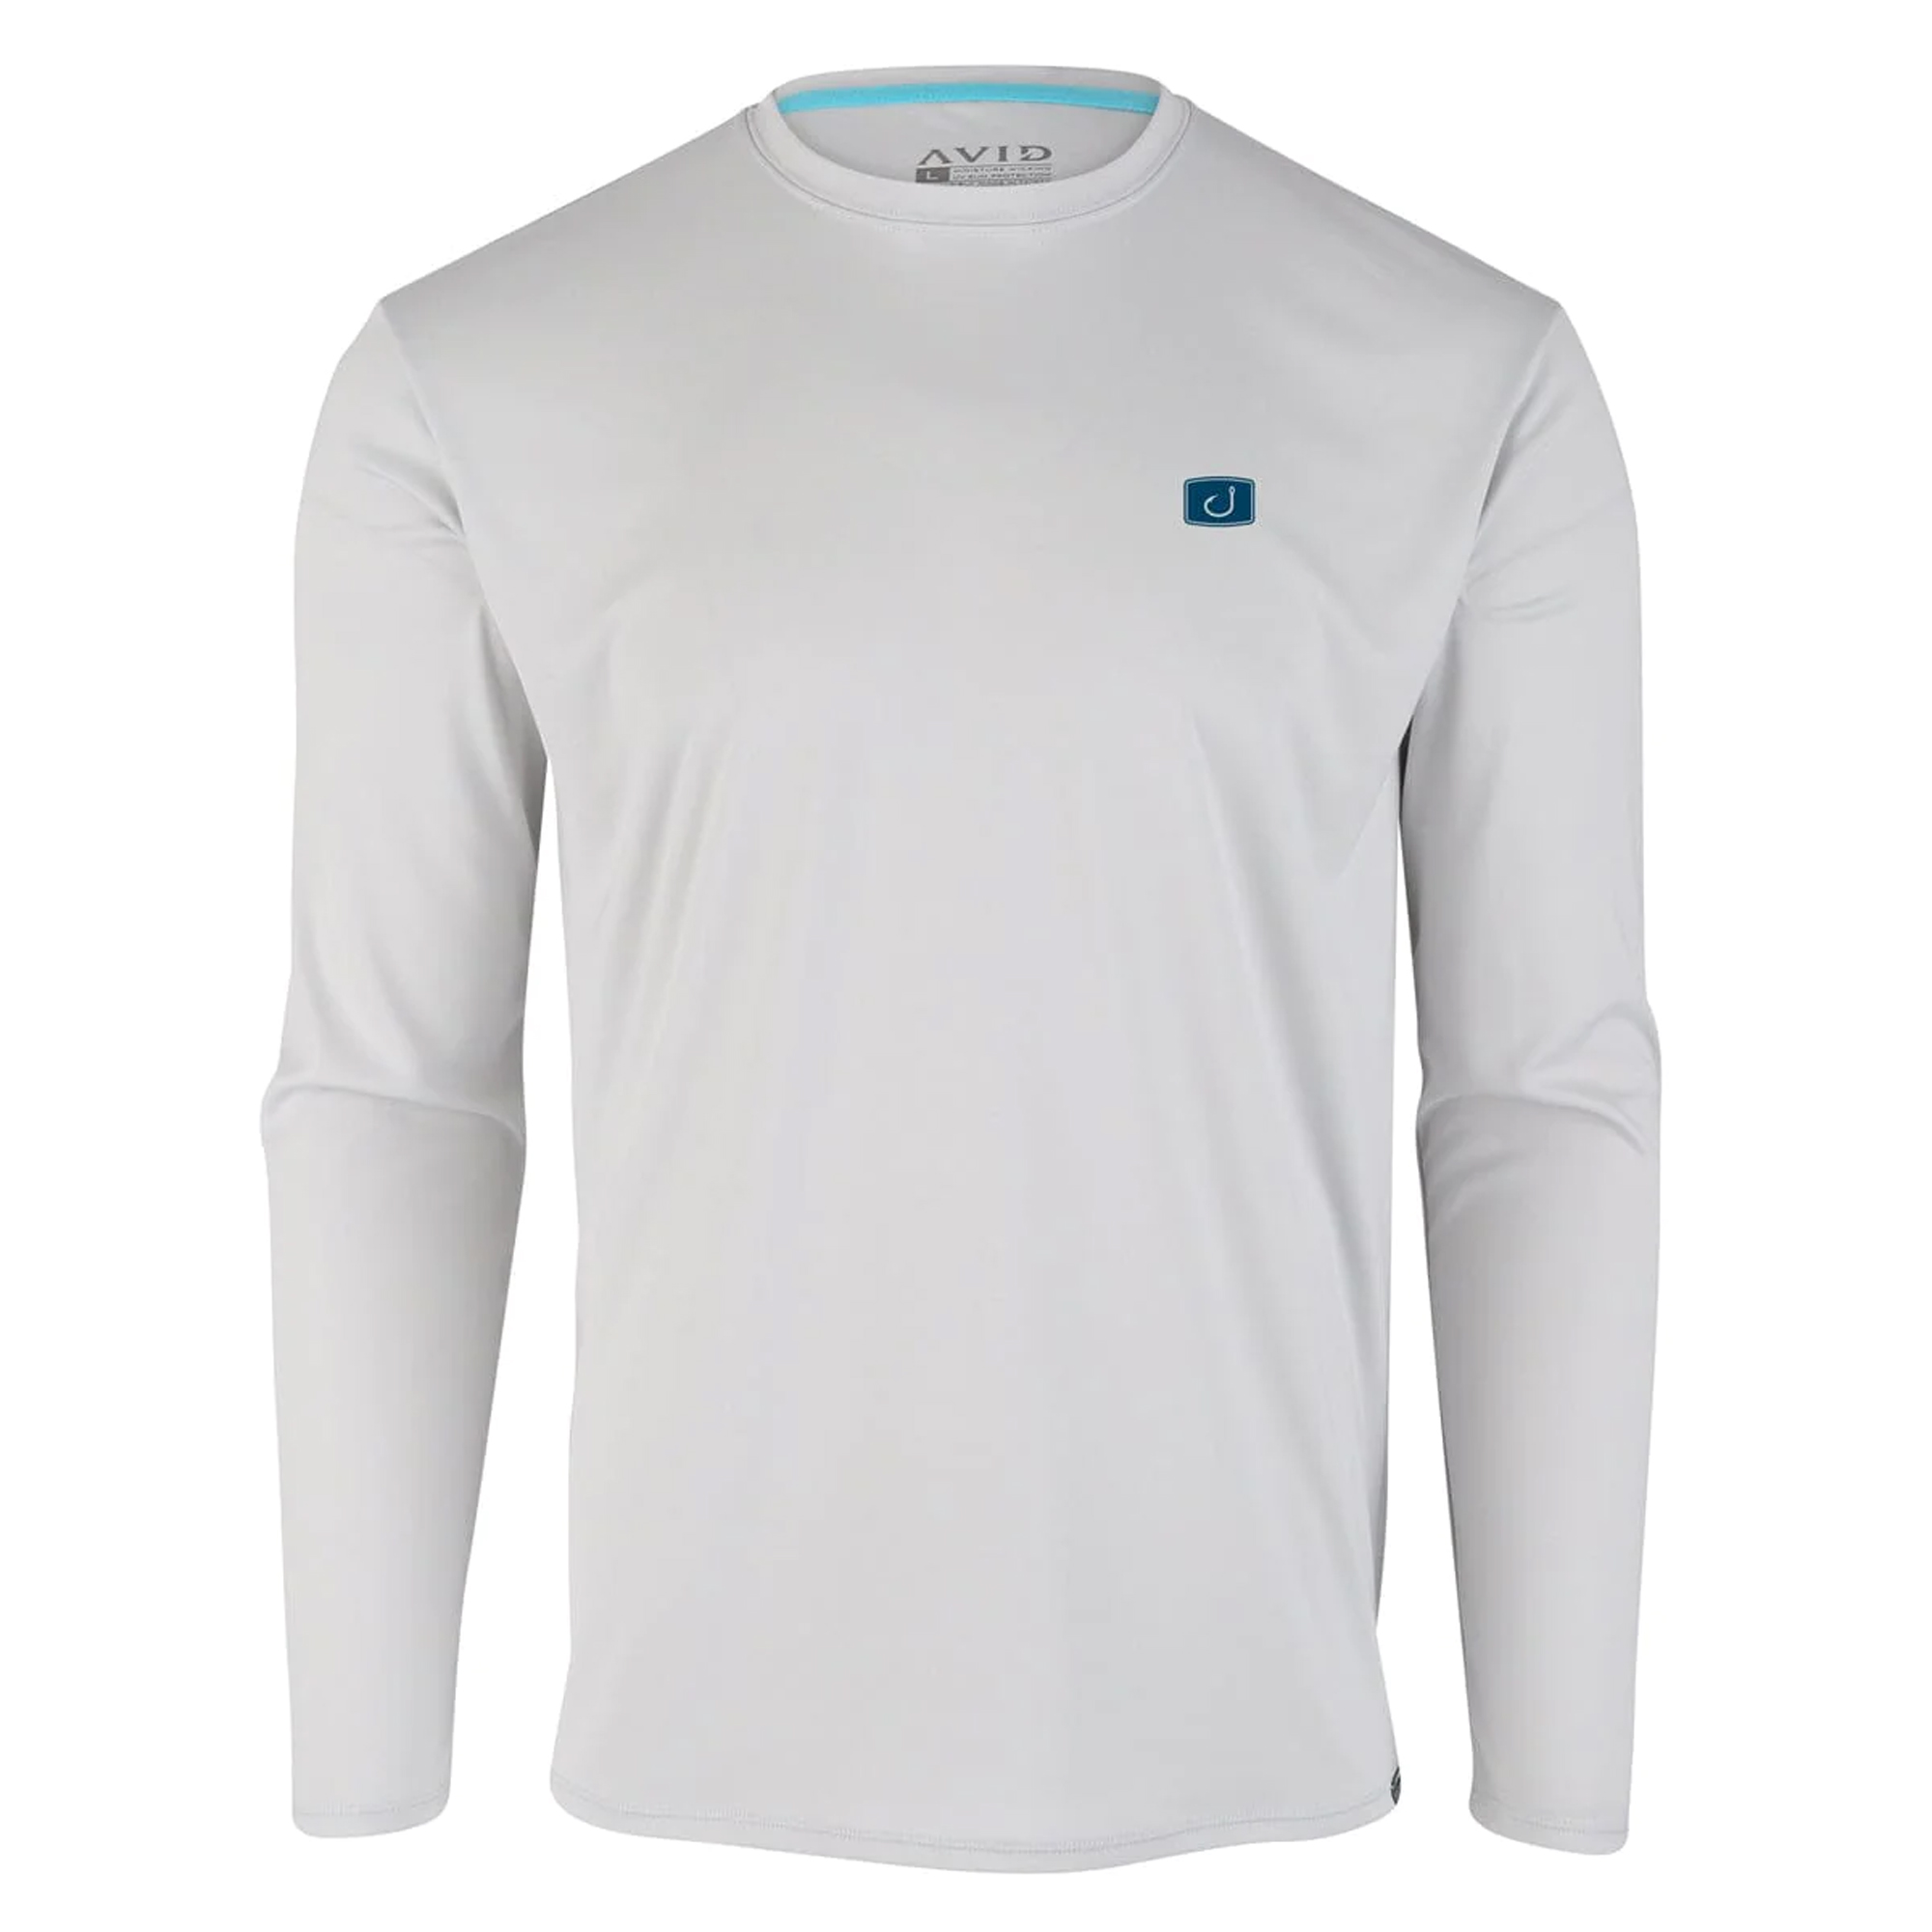 Outdoors shirt with sun protection, lightweight, and breathable